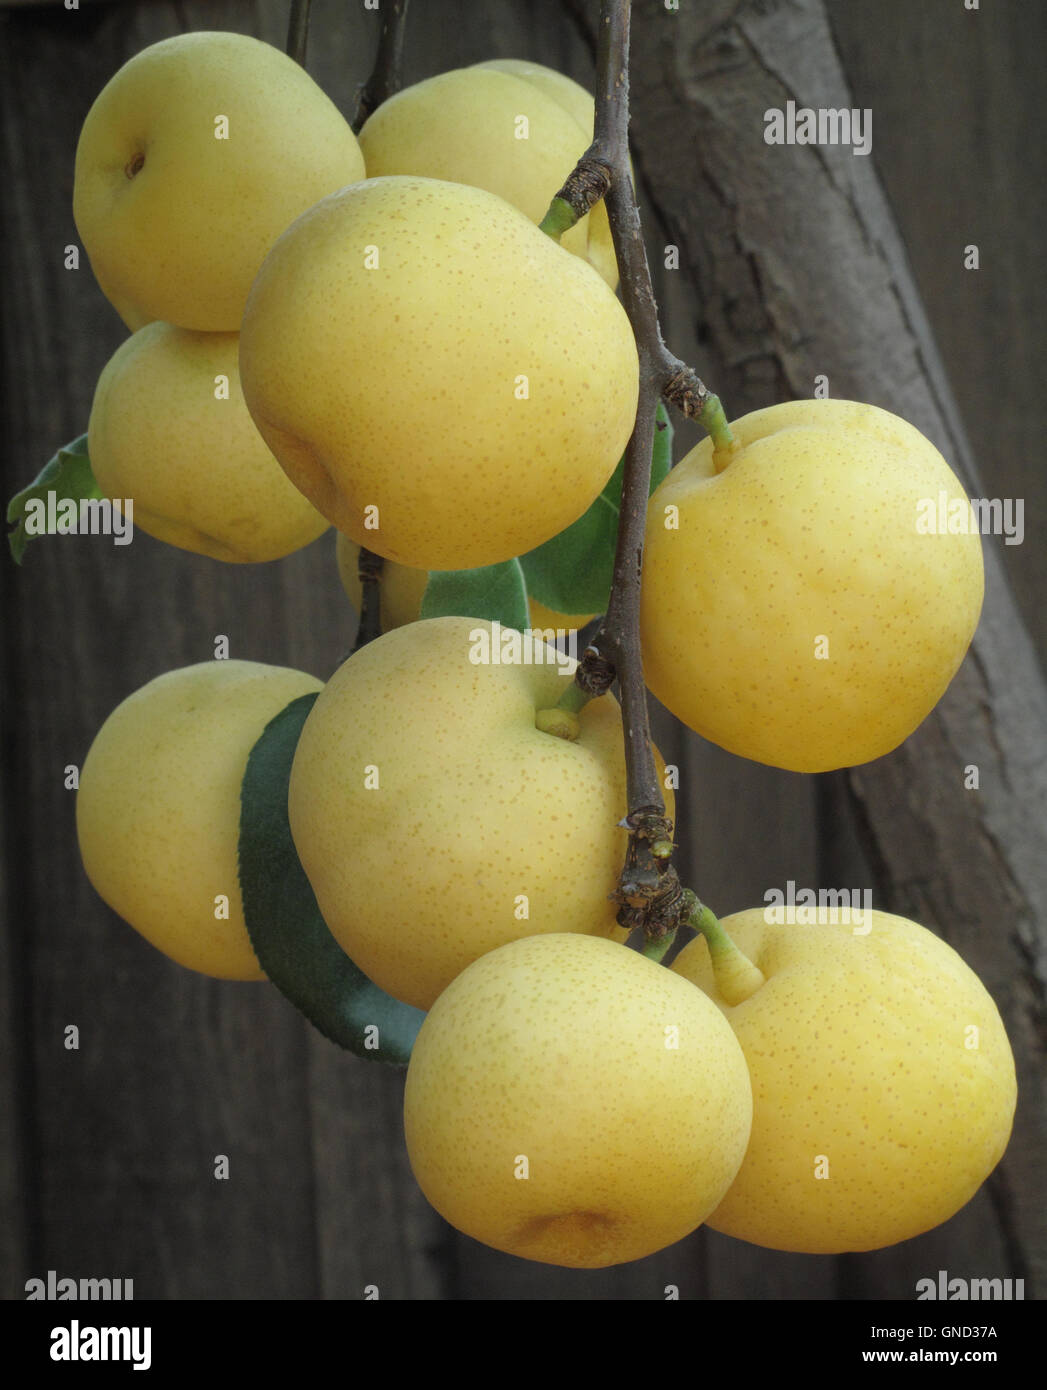 Asian pears growing on Asian pear tree Stock Photo